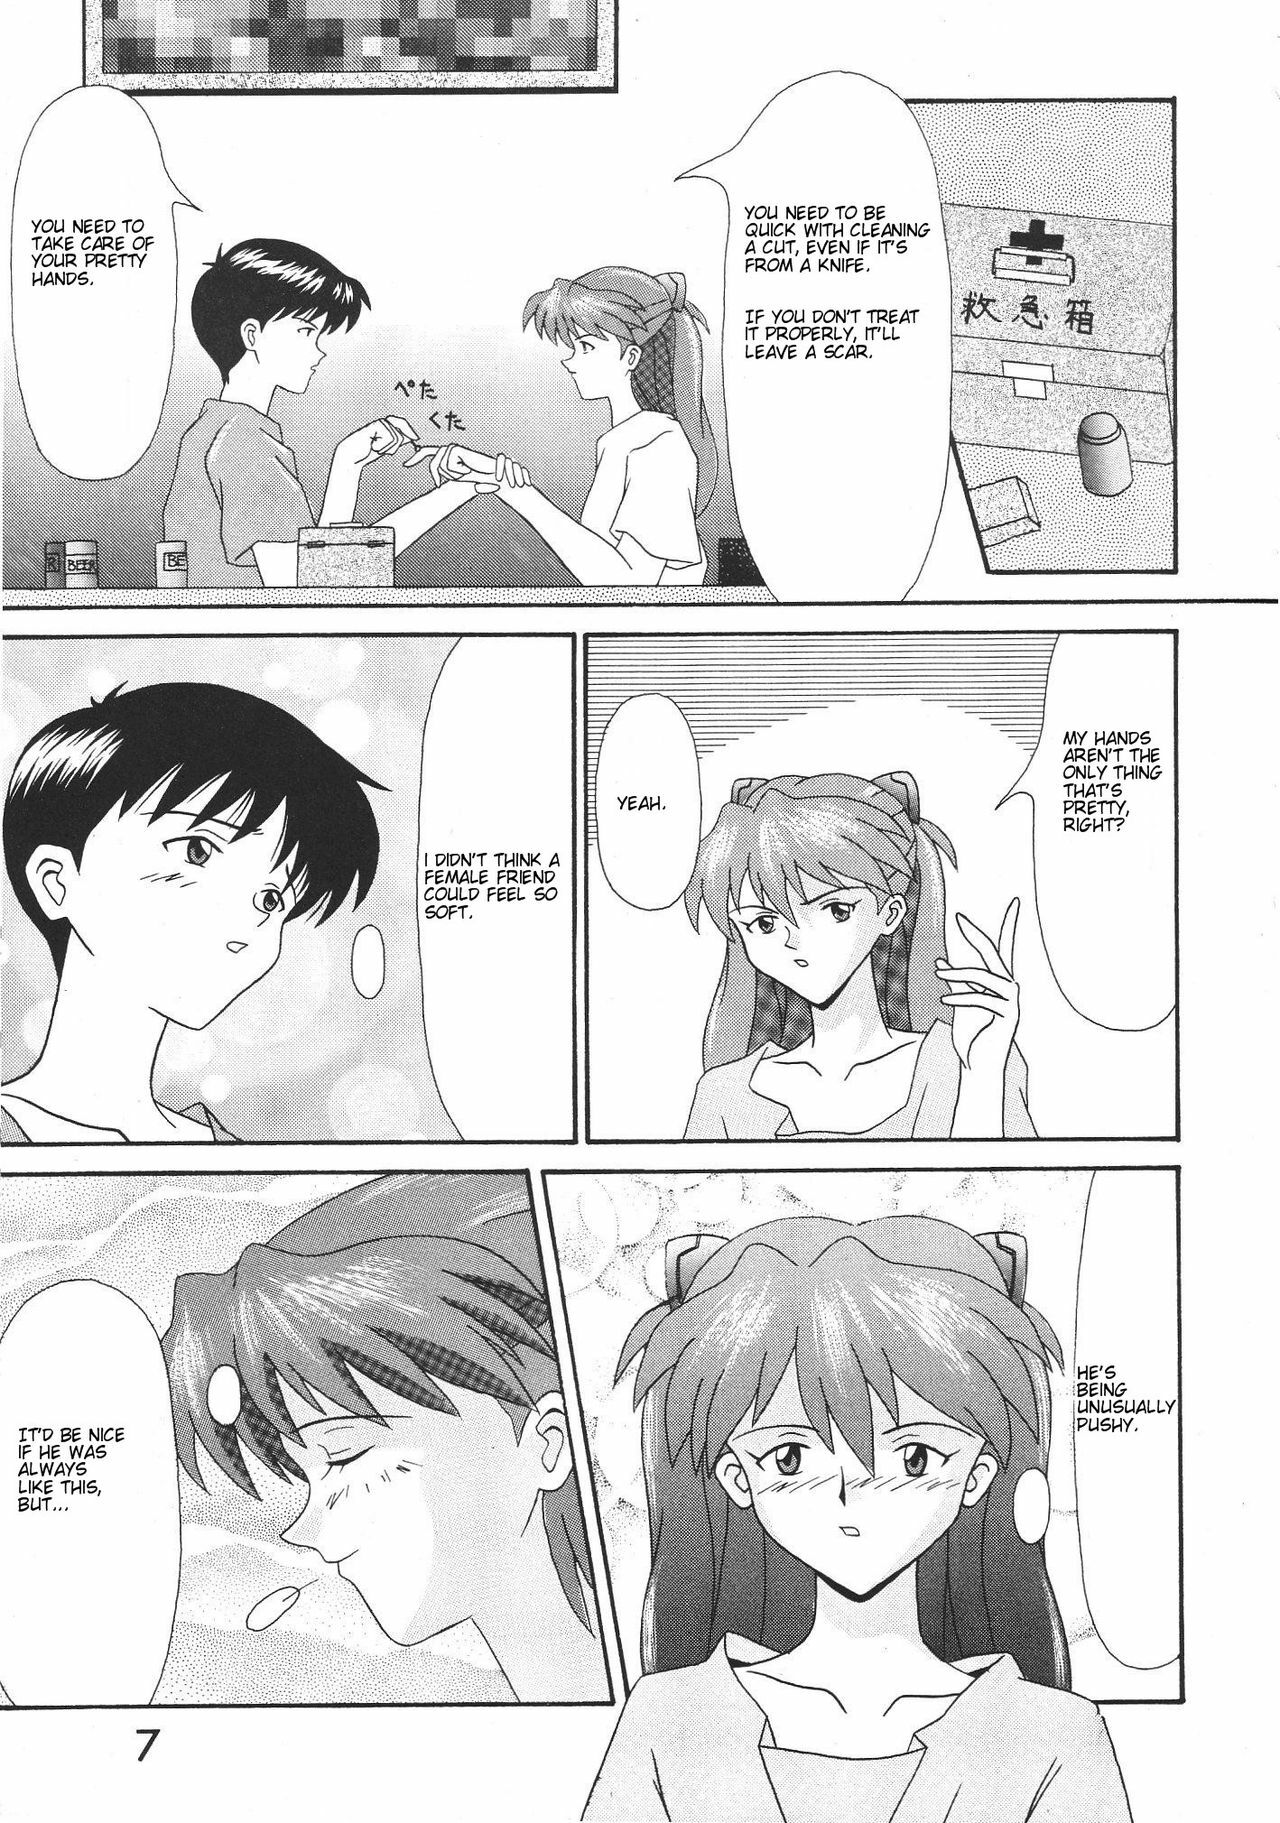 (C52) [System Speculation (Imai Youki)] TECHNICAL S.S. 1 2nd Impression (Neon Genesis Evangelion) [English] [Sailor Star Dust] page 7 full